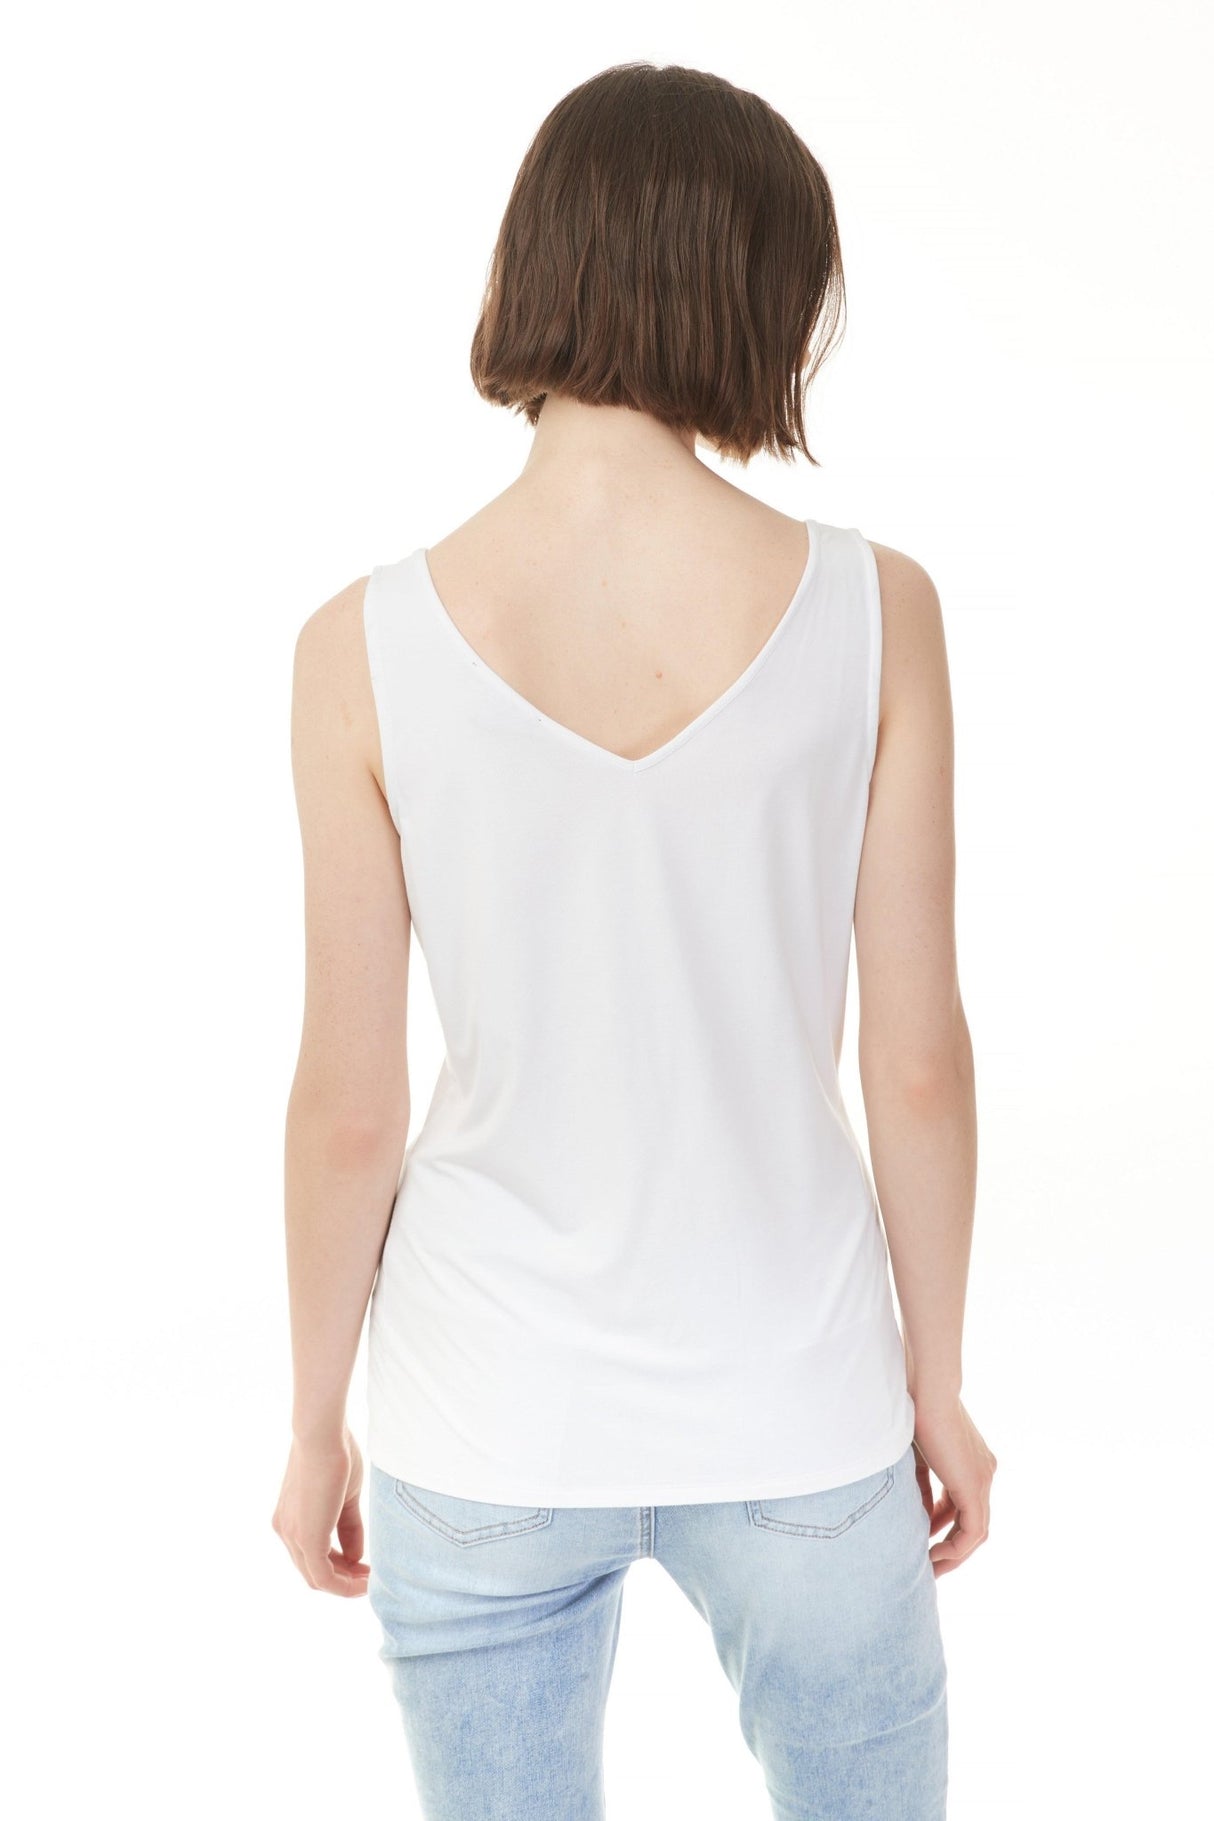 Charlie B Women's Stretch Bamboo Tank - A&M Clothing & Shoes